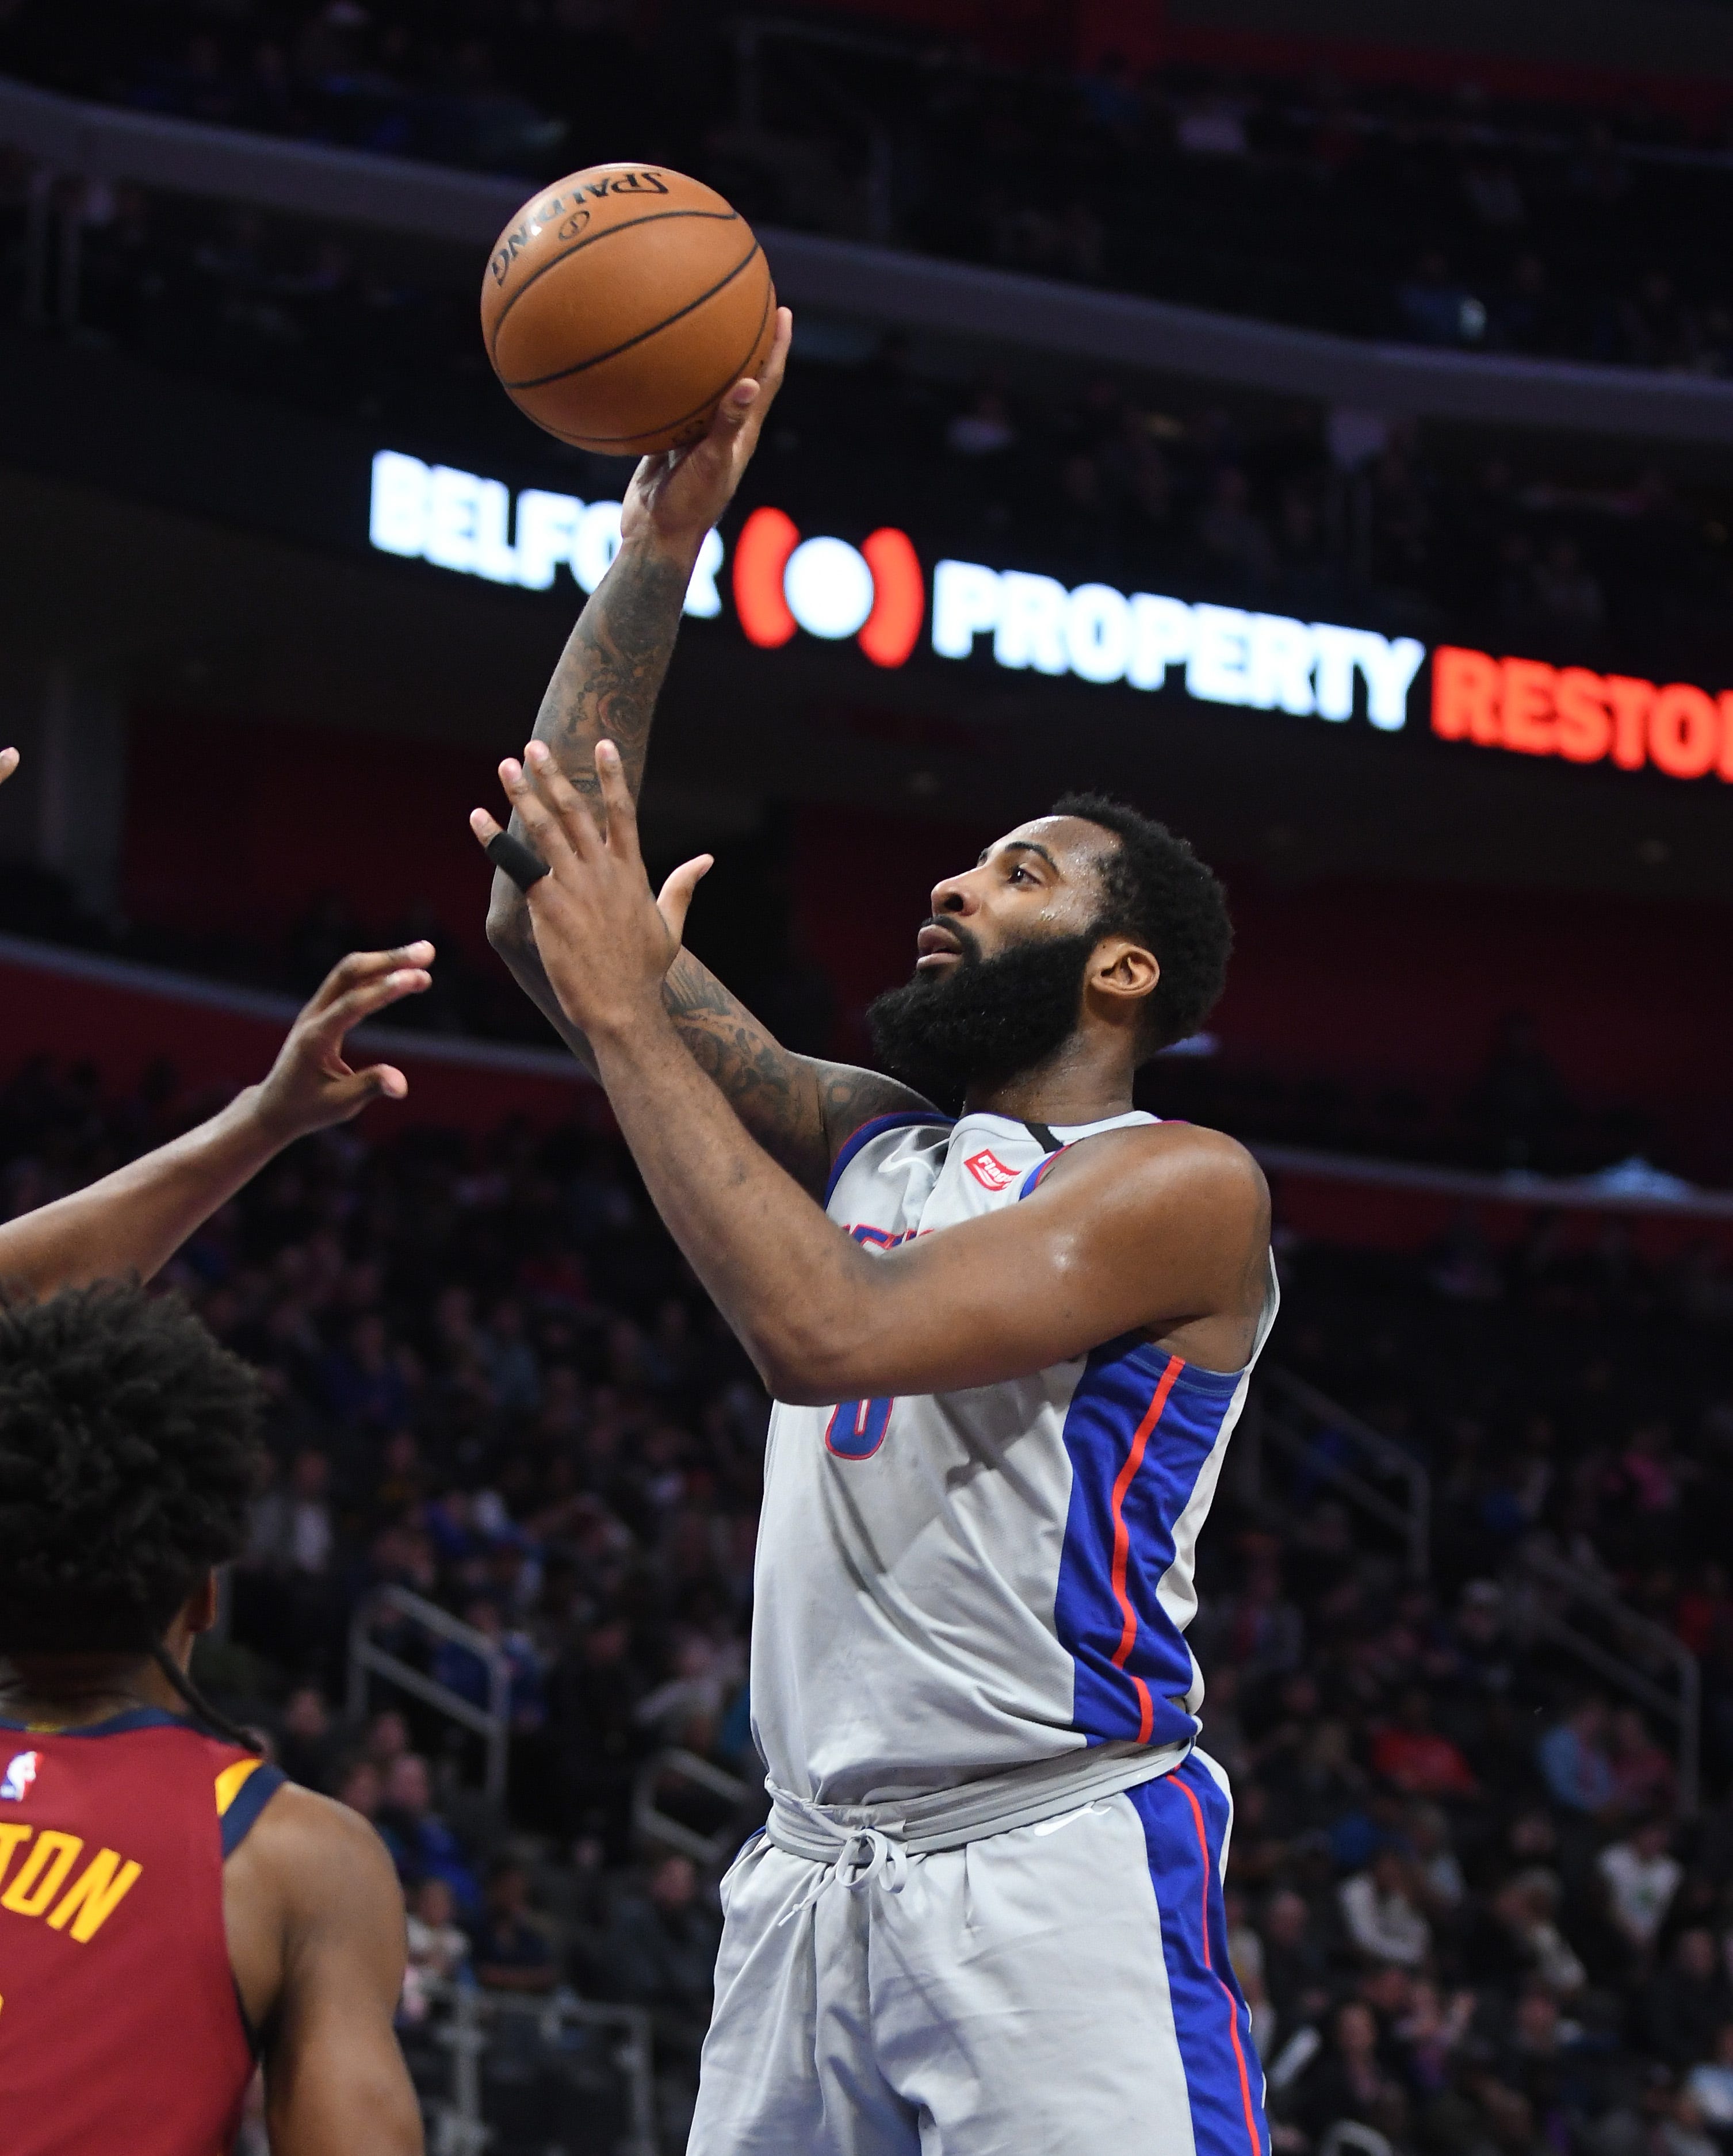 Pistons' Andre Drummond puts up a floater in the second quarter.